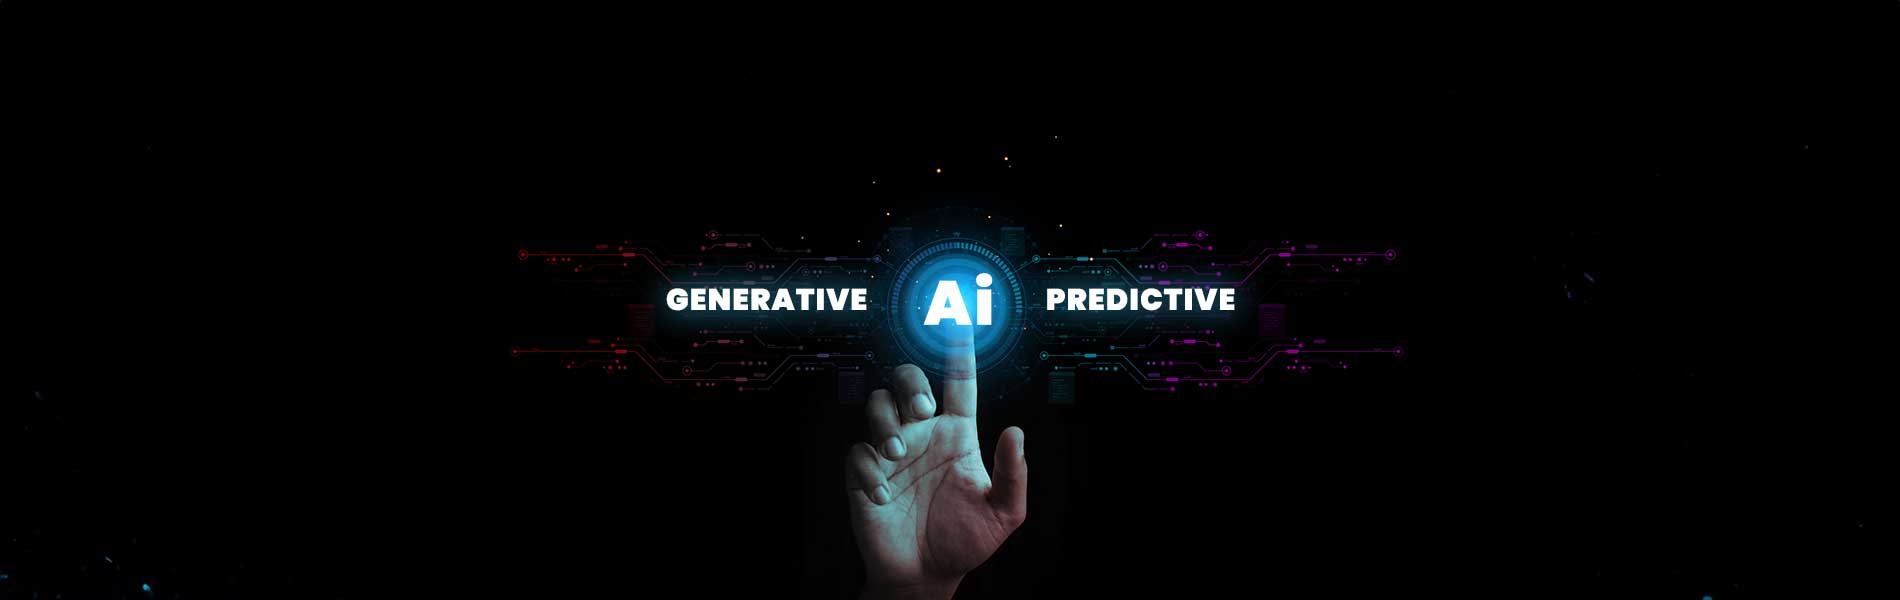 Generating or Predicting: The Two Faces of Artificial Intelligence